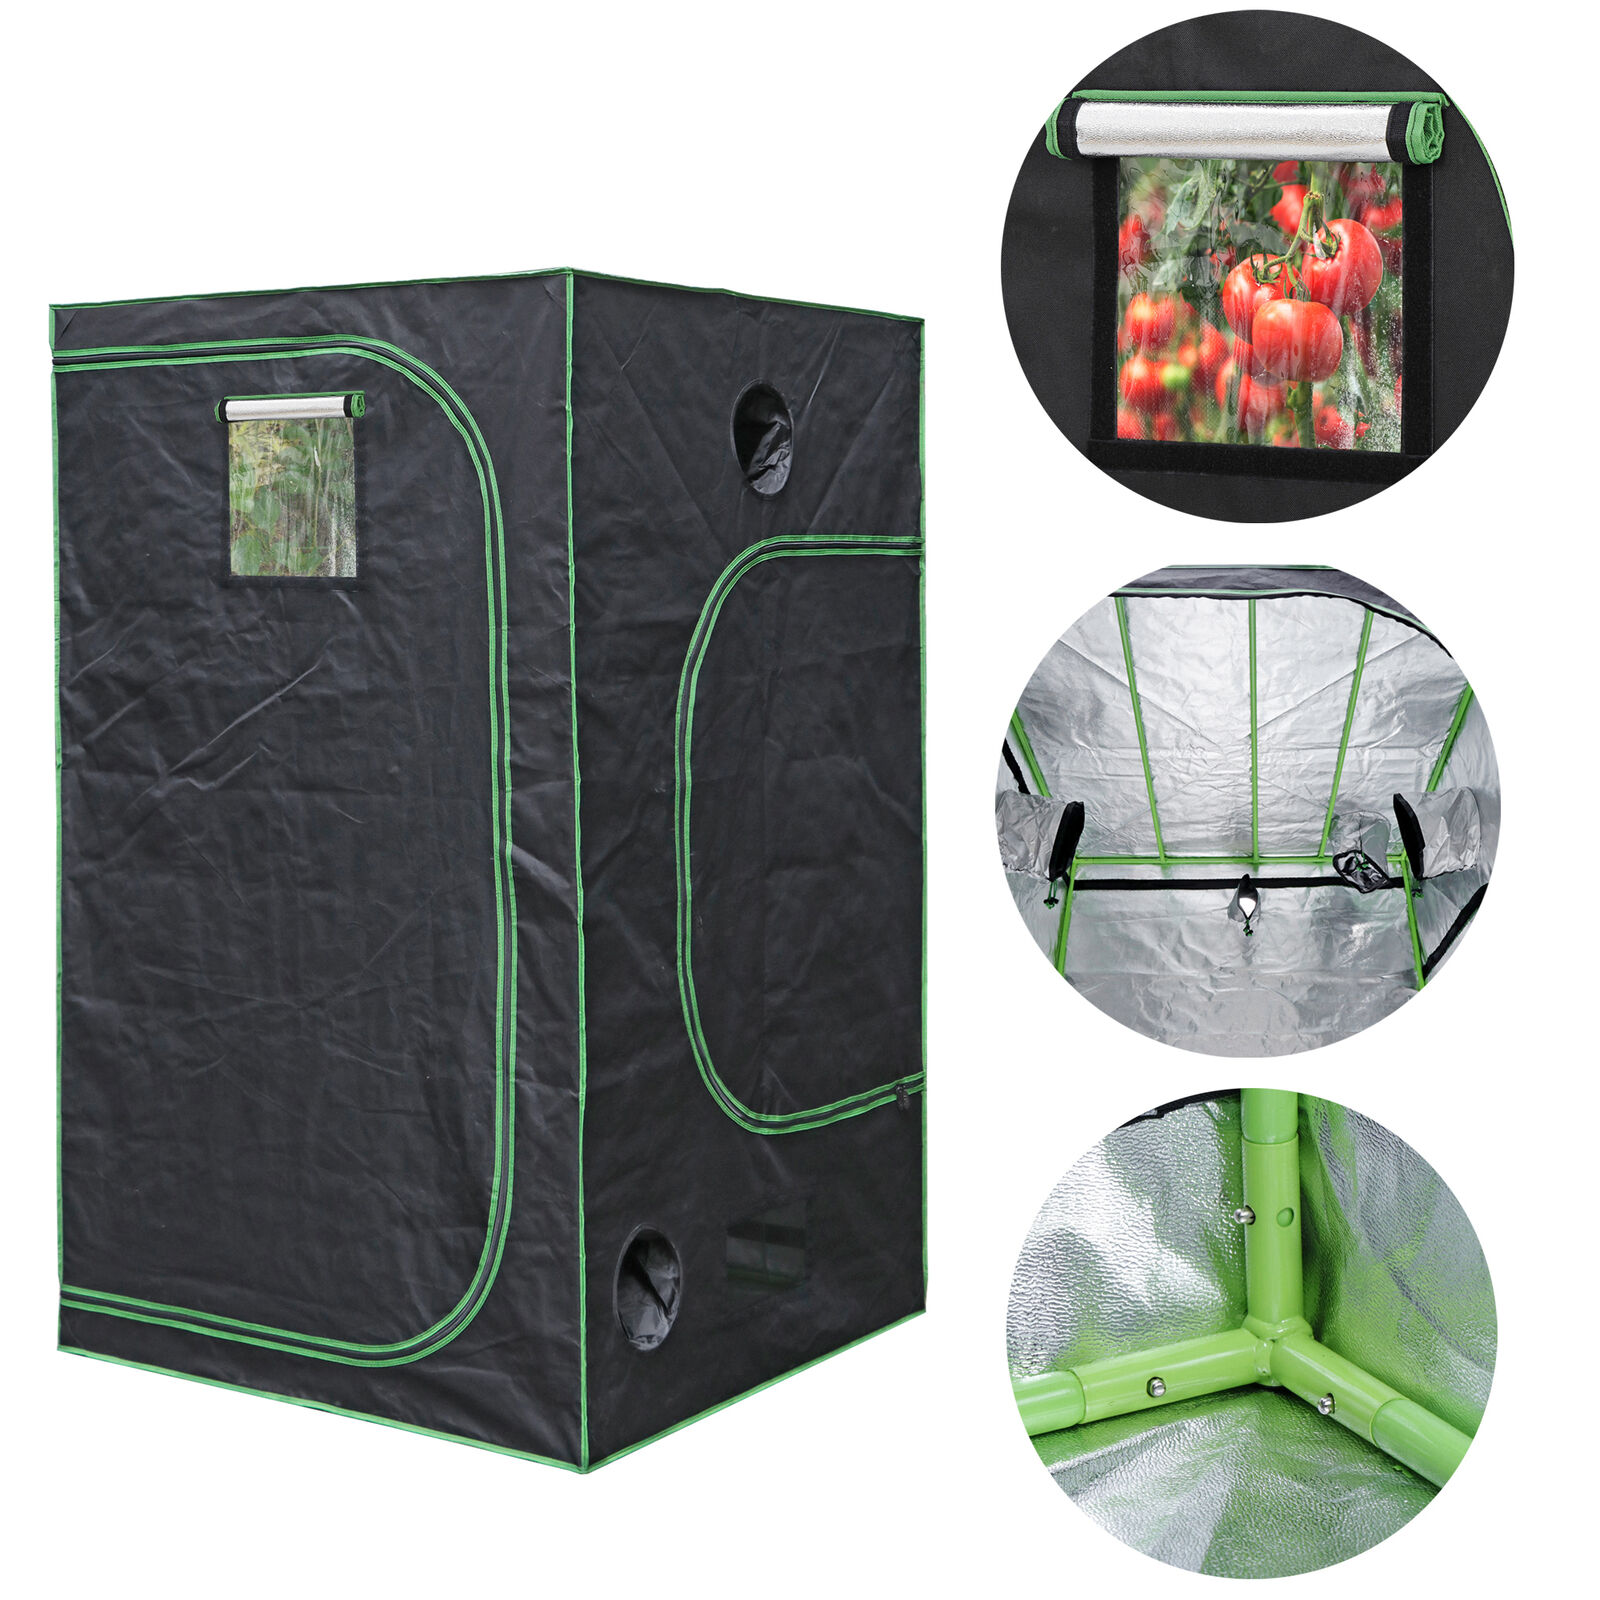 Box Seed Grow Tent with Window Indoor Horticulture for Indoor Plant Hydroponics 